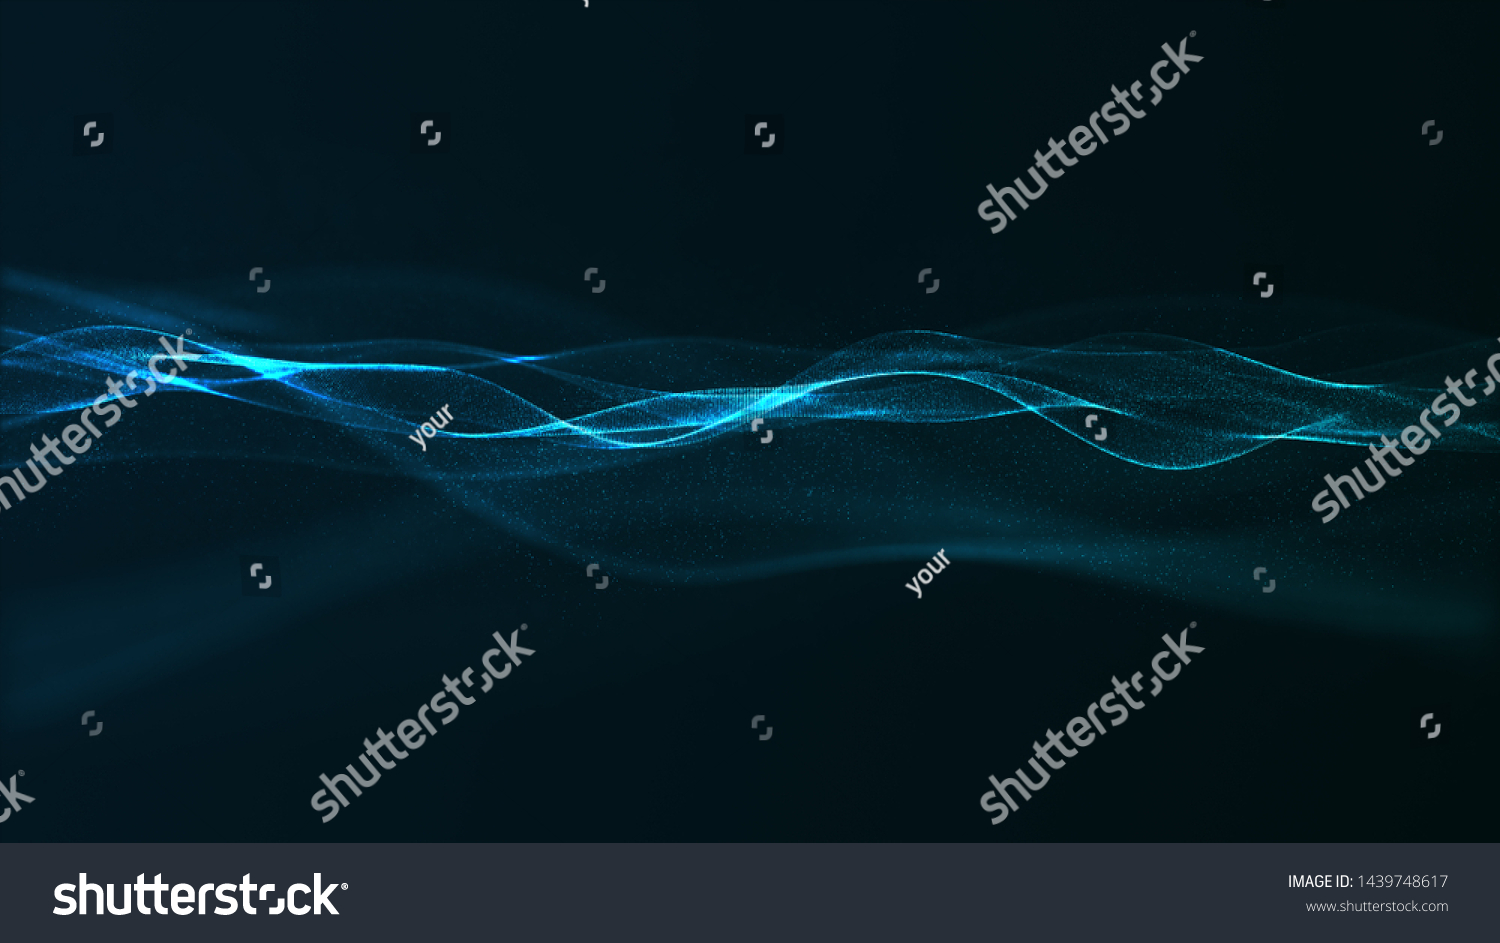 Abstract digital blue color wave with flowing small particles dance motion on wave and light abstract background. 3D illustration #1439748617